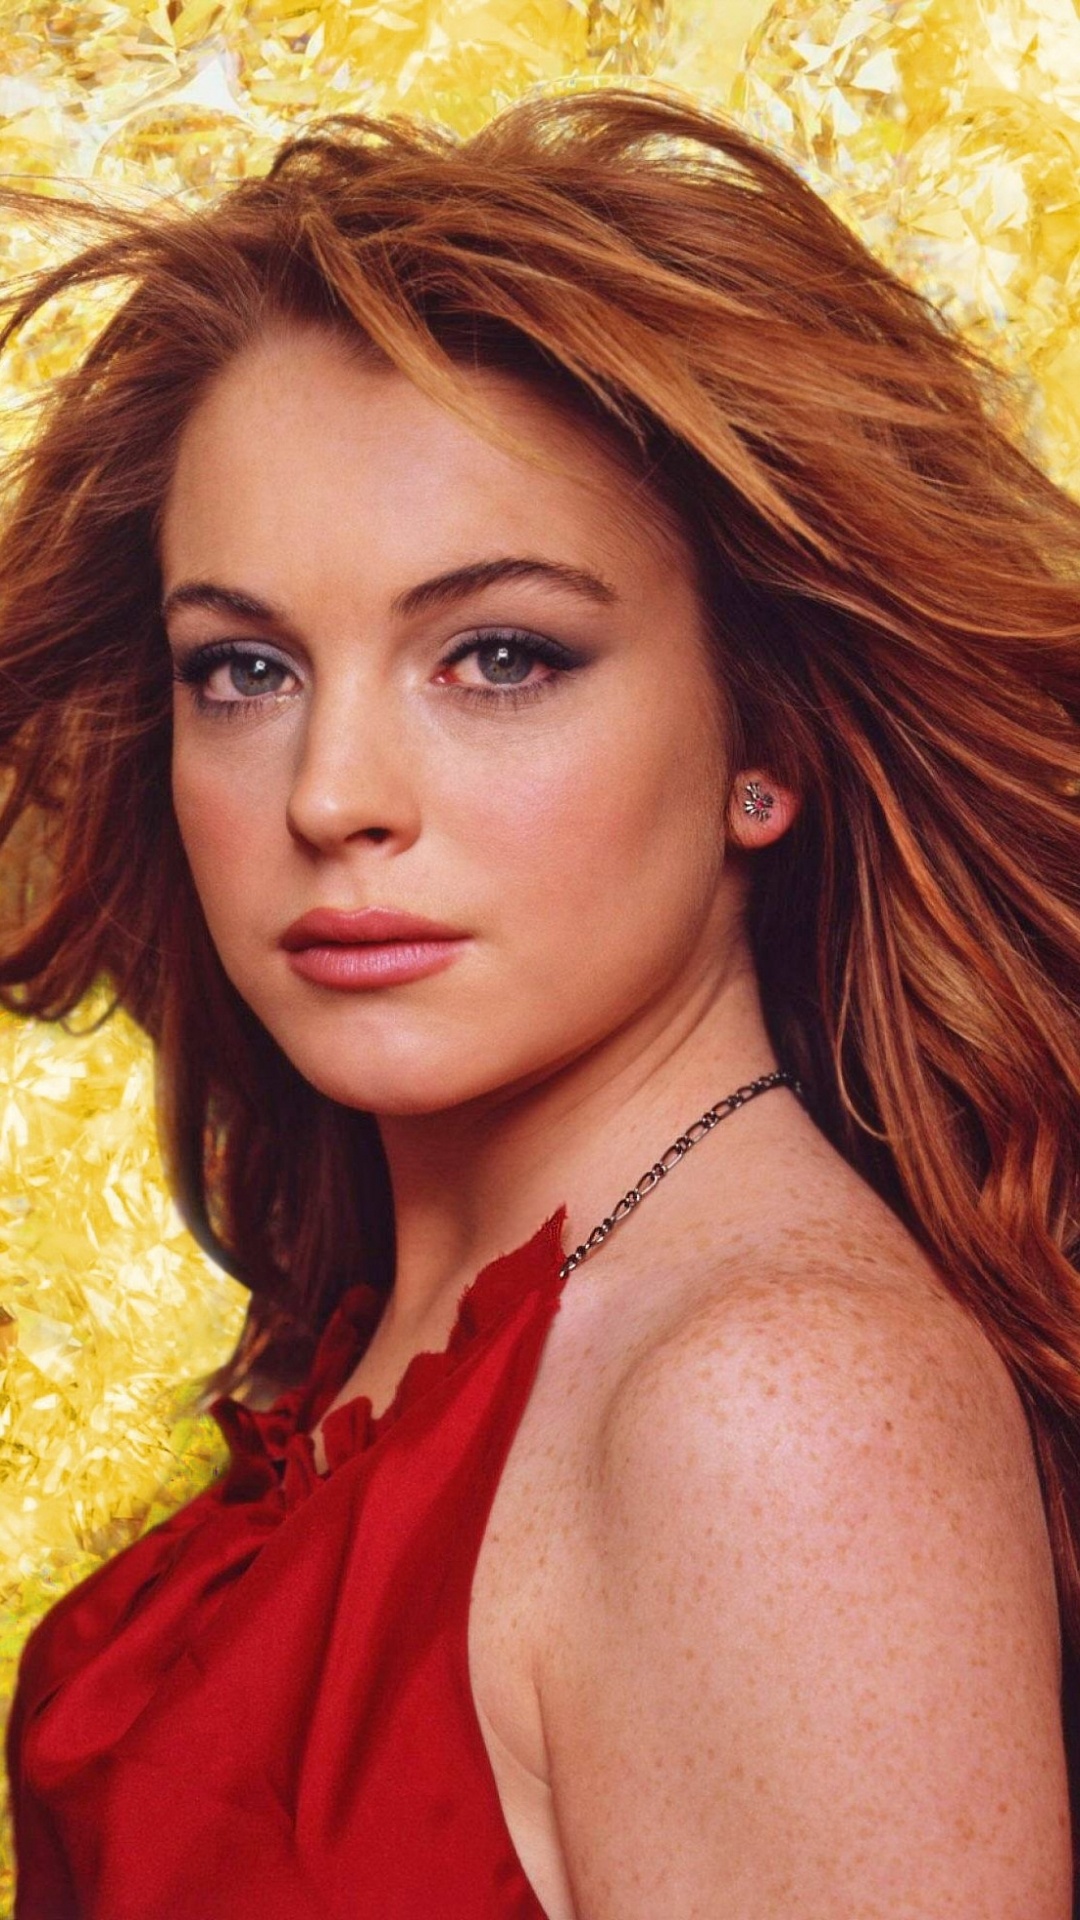 Lindsay Lohan: The youngest host of the MTV Movie Awards, An American actress. 1080x1920 Full HD Wallpaper.